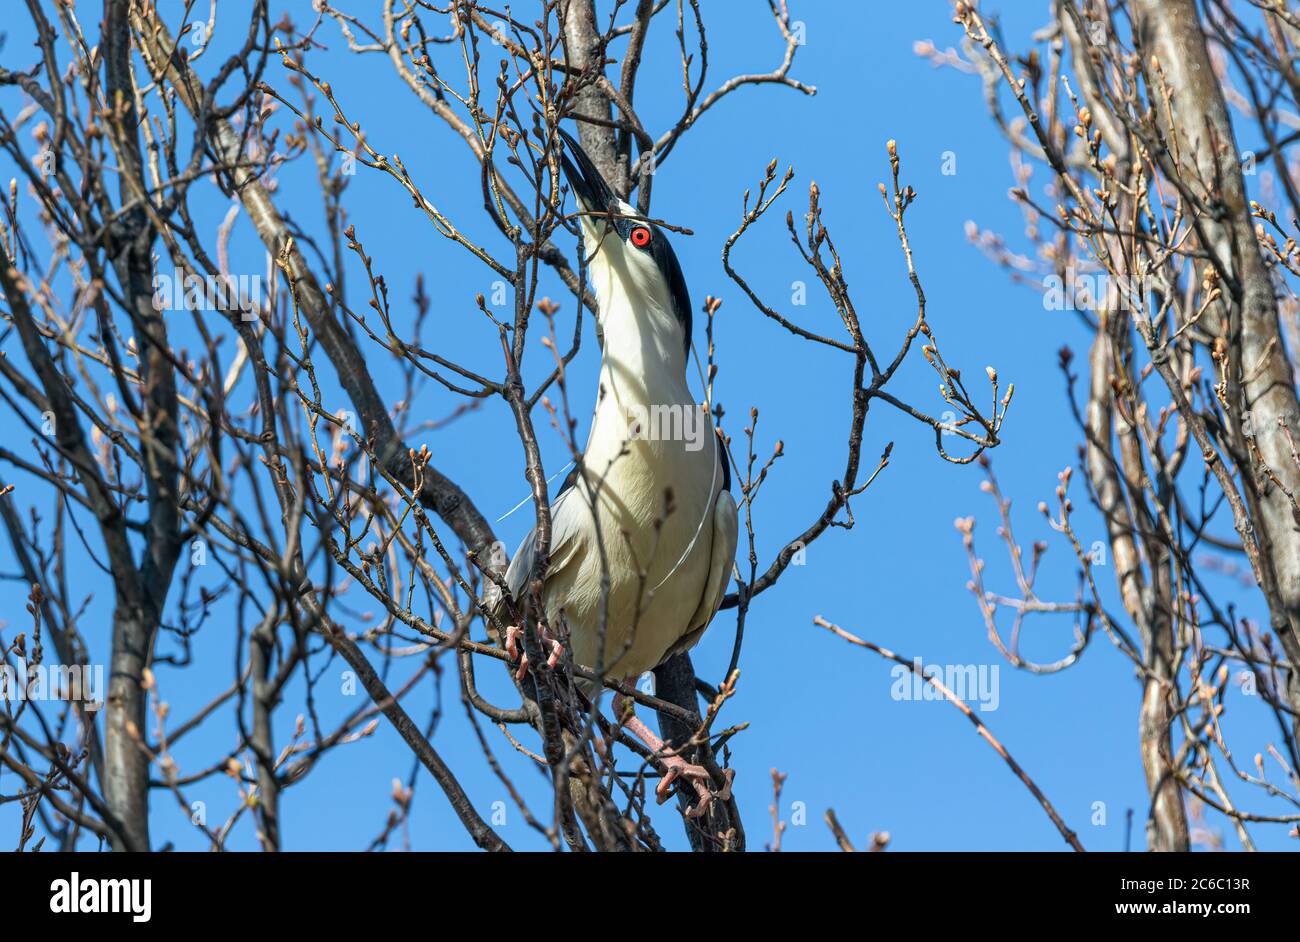 A Black-crowned Night Heron perched in a budding tree, reaches for the perfect small limb to take for nesting purposes. Stock Photo